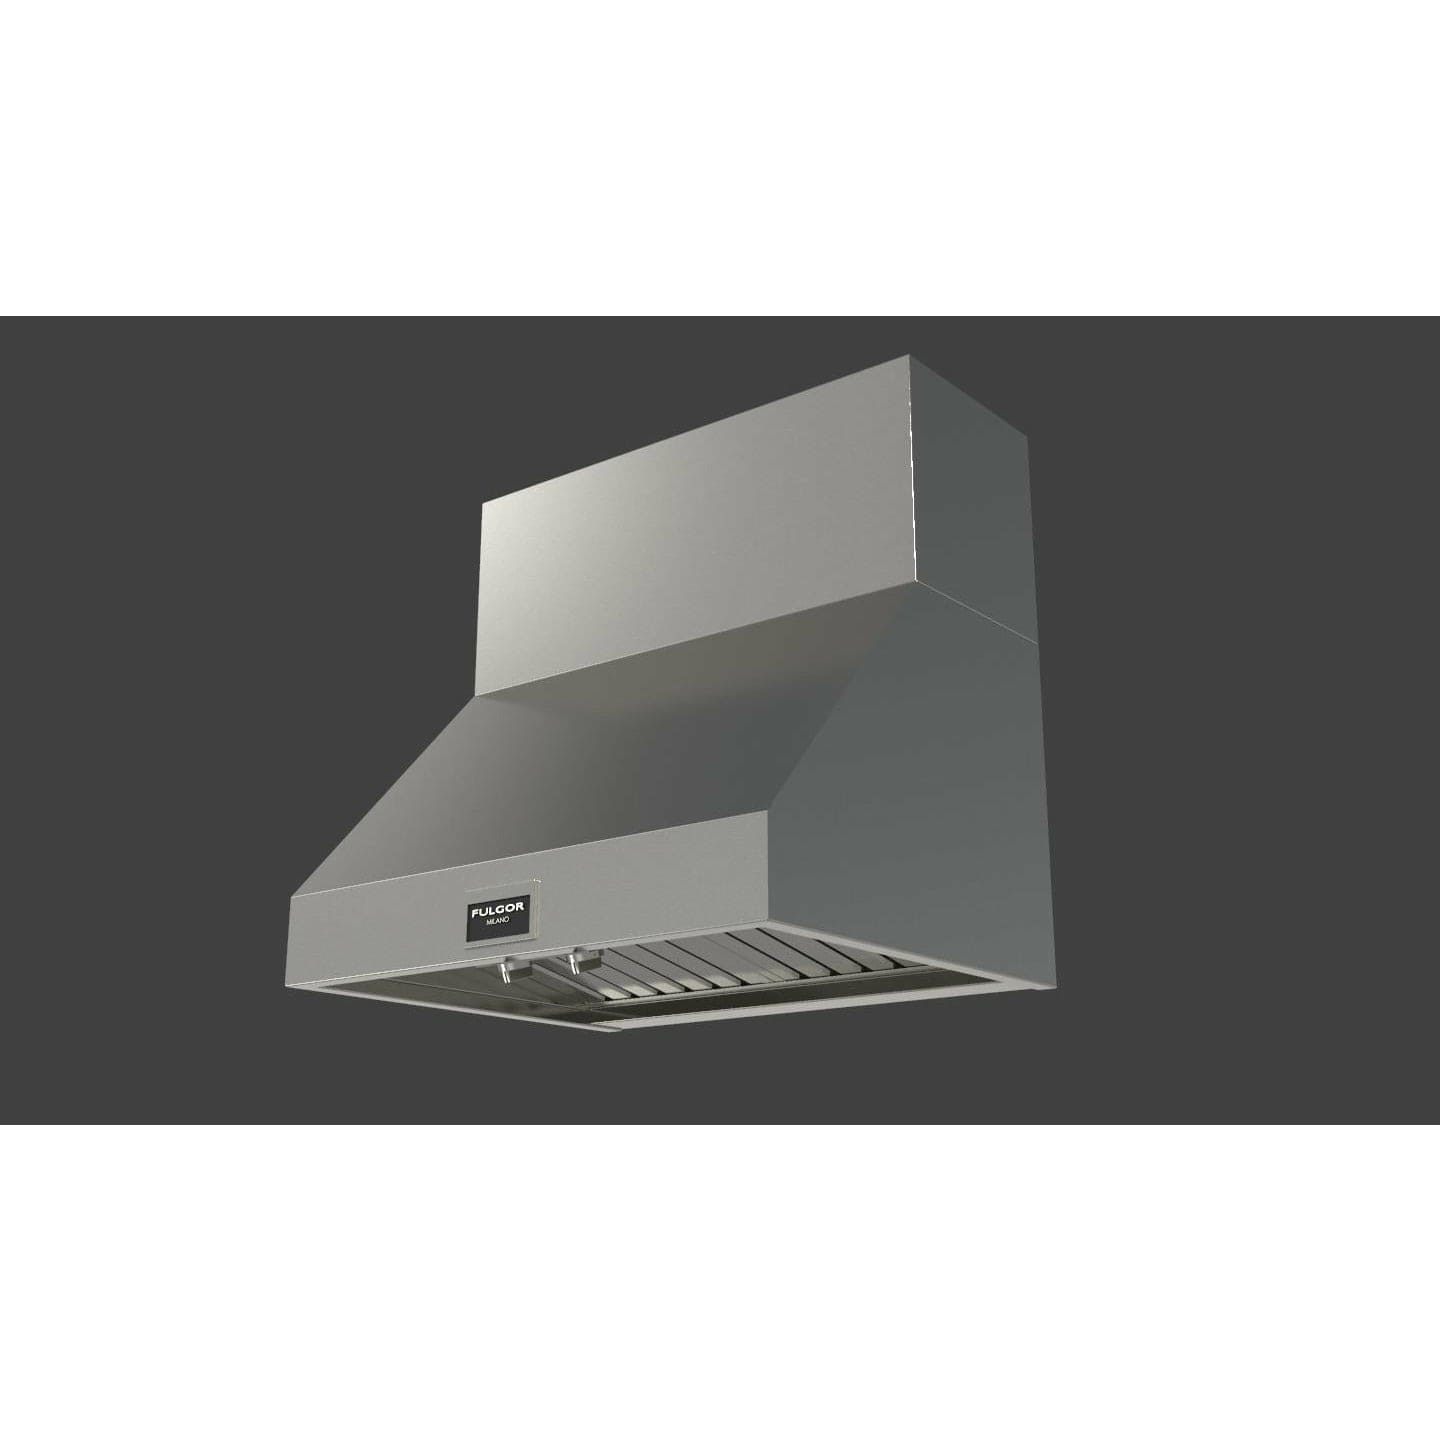 Fulgor Milano 30" Pro Style Wall Mount Convertible Hood with 600 CFM, Stainless Steel - F6PH30S2 Hoods F6PH30S2 Luxury Appliances Direct